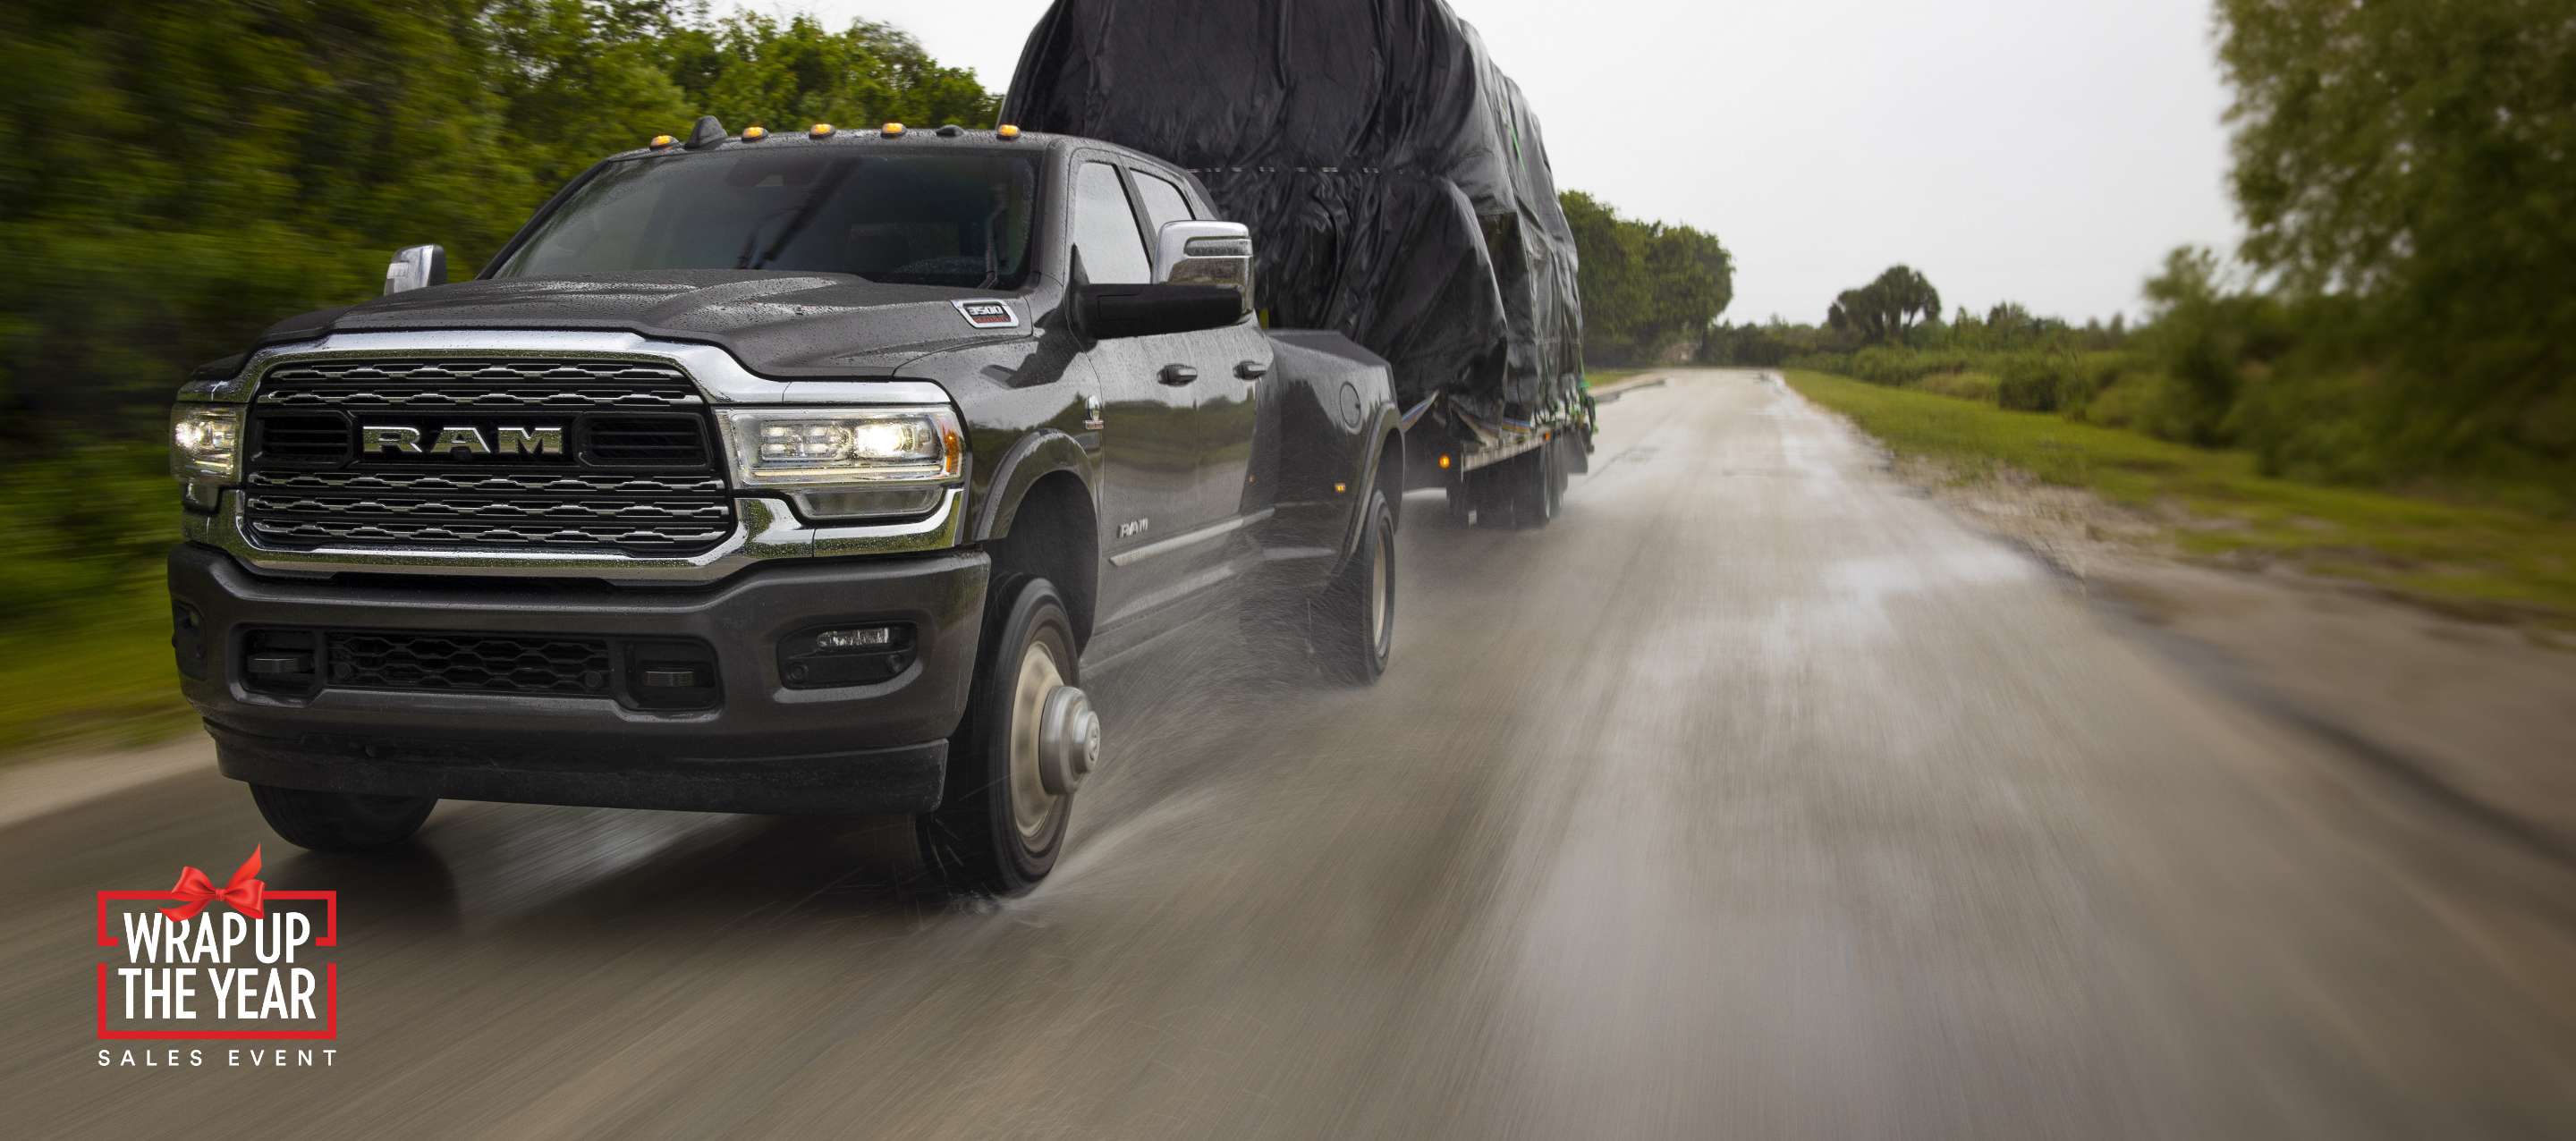 A black 2023 Ram 3500 Limited 4x4 Mega Cab towing a large covered trailer as it is driven down a highway in the rain. Ram Wrap Up the Year Sales Event.